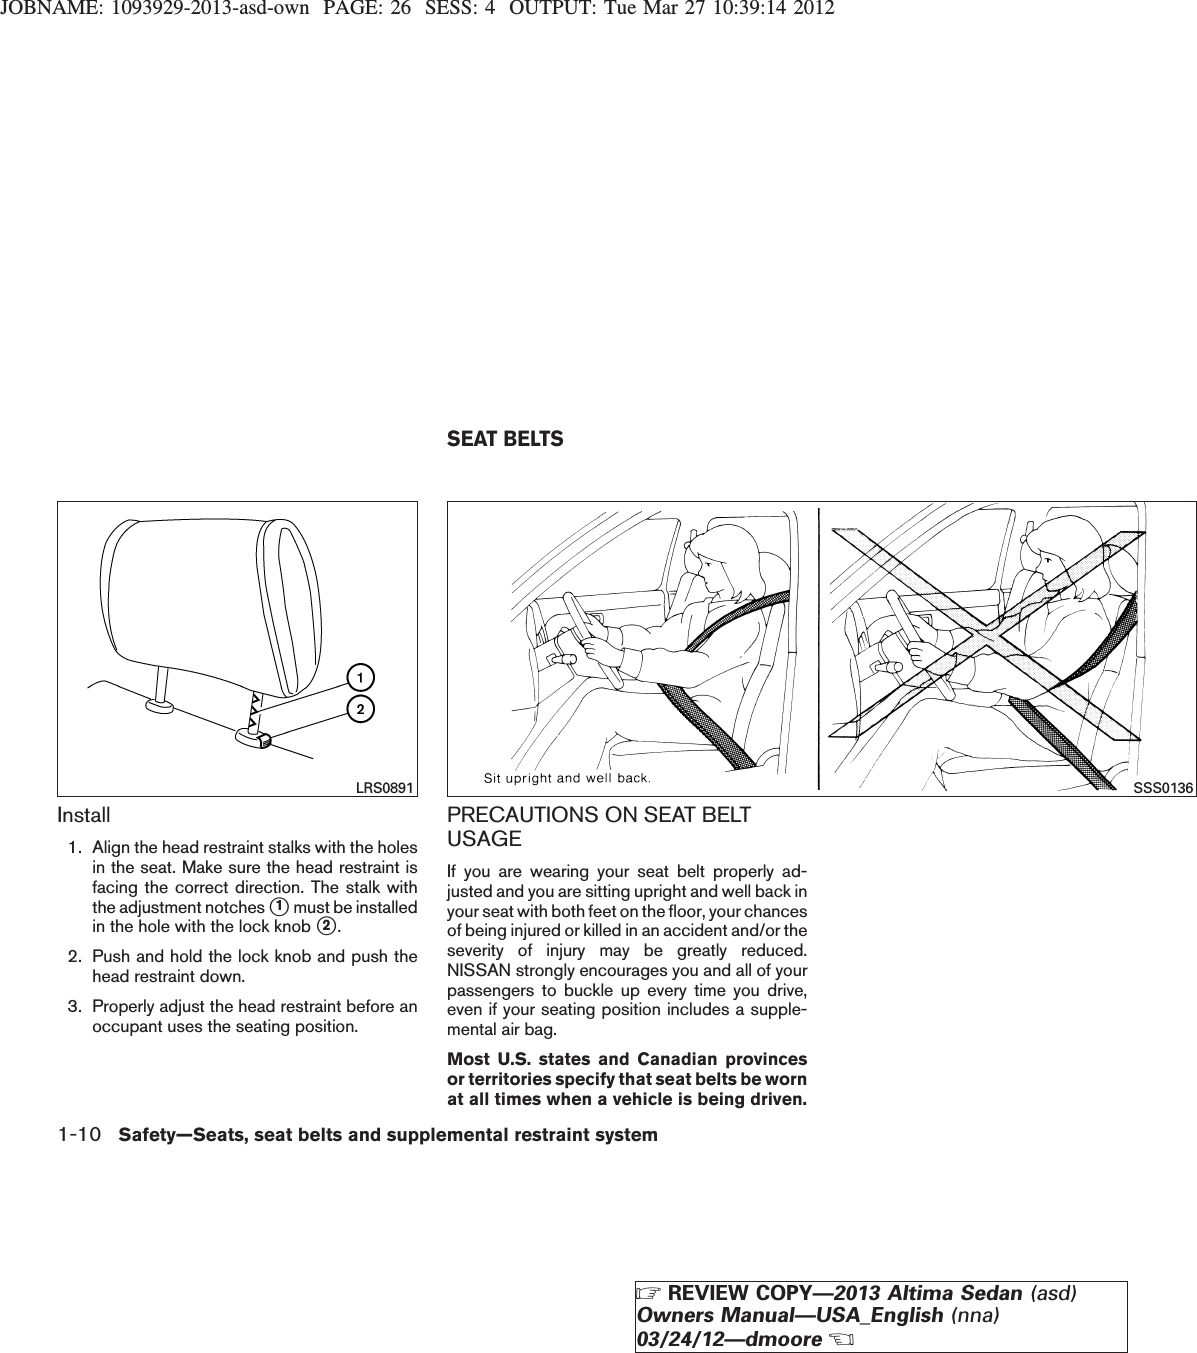 JOBNAME: 1093929-2013-asd-own PAGE: 26 SESS: 4 OUTPUT: Tue Mar 27 10:39:14 2012Install1. Align the head restraint stalks with the holesin the seat. Make sure the head restraint isfacing the correct direction. The stalk withthe adjustment notches s1must be installedin the hole with the lock knob s2.2. Push and hold the lock knob and push thehead restraint down.3. Properly adjust the head restraint before anoccupant uses the seating position.PRECAUTIONS ON SEAT BELTUSAGEIf you are wearing your seat belt properly ad-justed and you are sitting upright and well back inyour seat with both feet on the floor, your chancesof being injured or killed in an accident and/or theseverity of injury may be greatly reduced.NISSAN strongly encourages you and all of yourpassengers to buckle up every time you drive,even if your seating position includes a supple-mental air bag.Most U.S. states and Canadian provincesor territories specify that seat belts be wornat all times when a vehicle is being driven.LRS0891 SSS0136SEAT BELTS1-10 Safety—Seats, seat belts and supplemental restraint systemZREVIEW COPY—2013 Altima Sedan (asd)Owners Manual—USA_English (nna)03/24/12—dmooreX